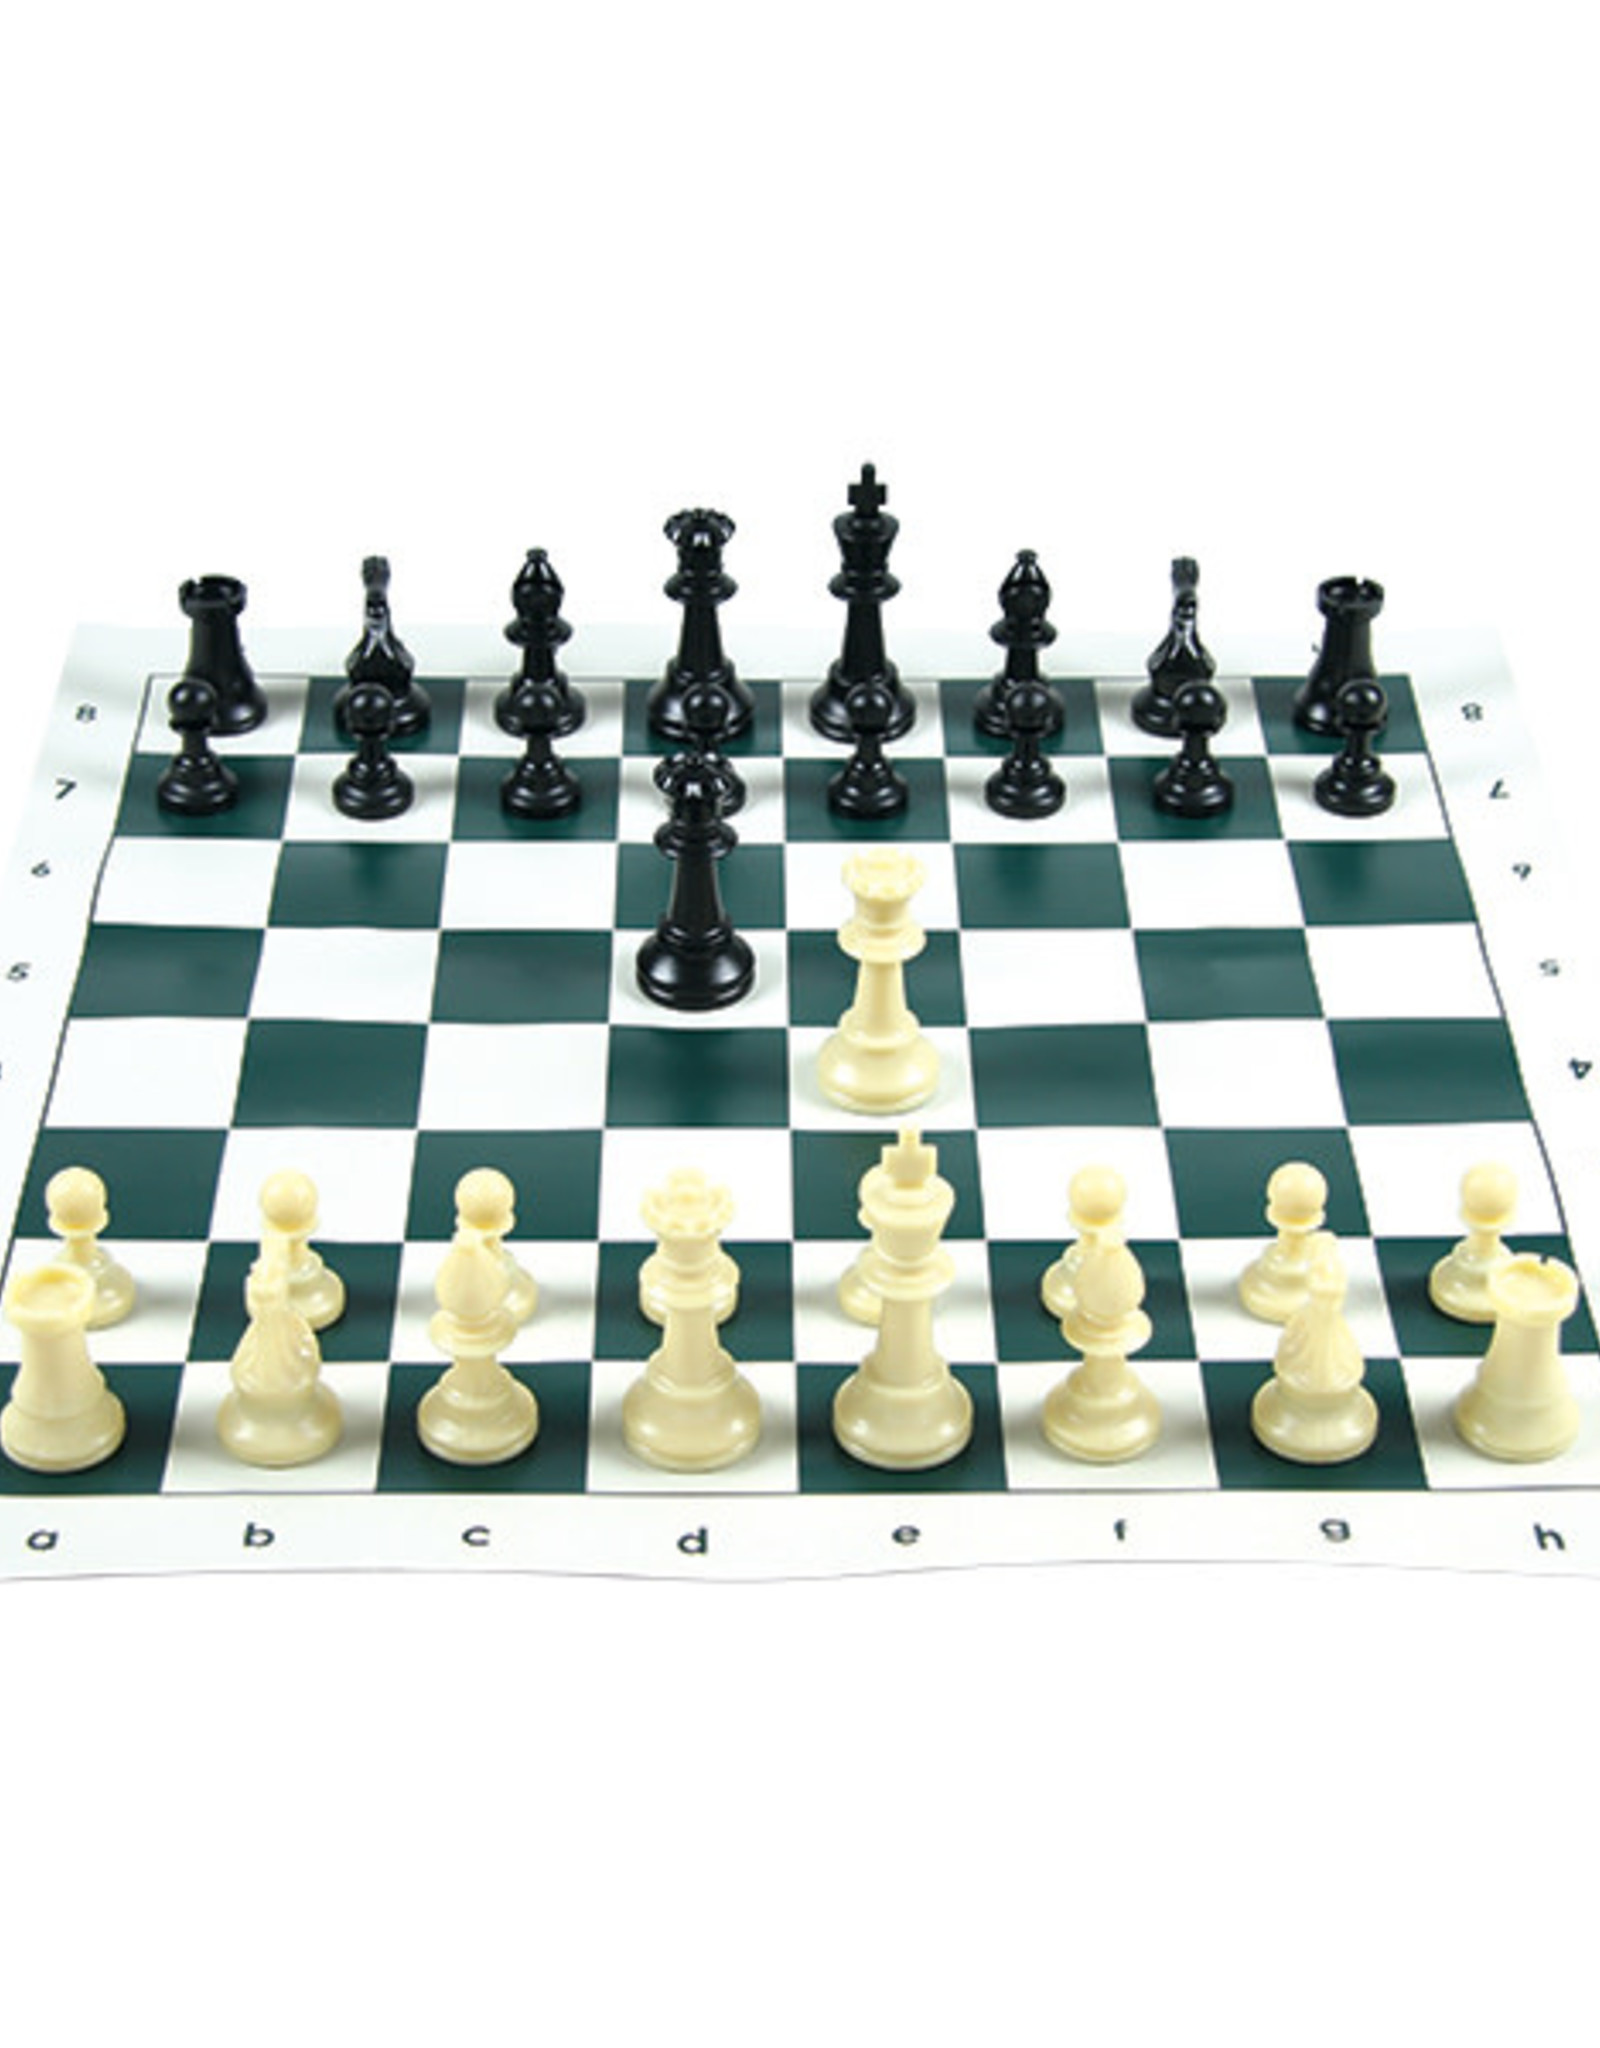 Tournament Chess set in a bag